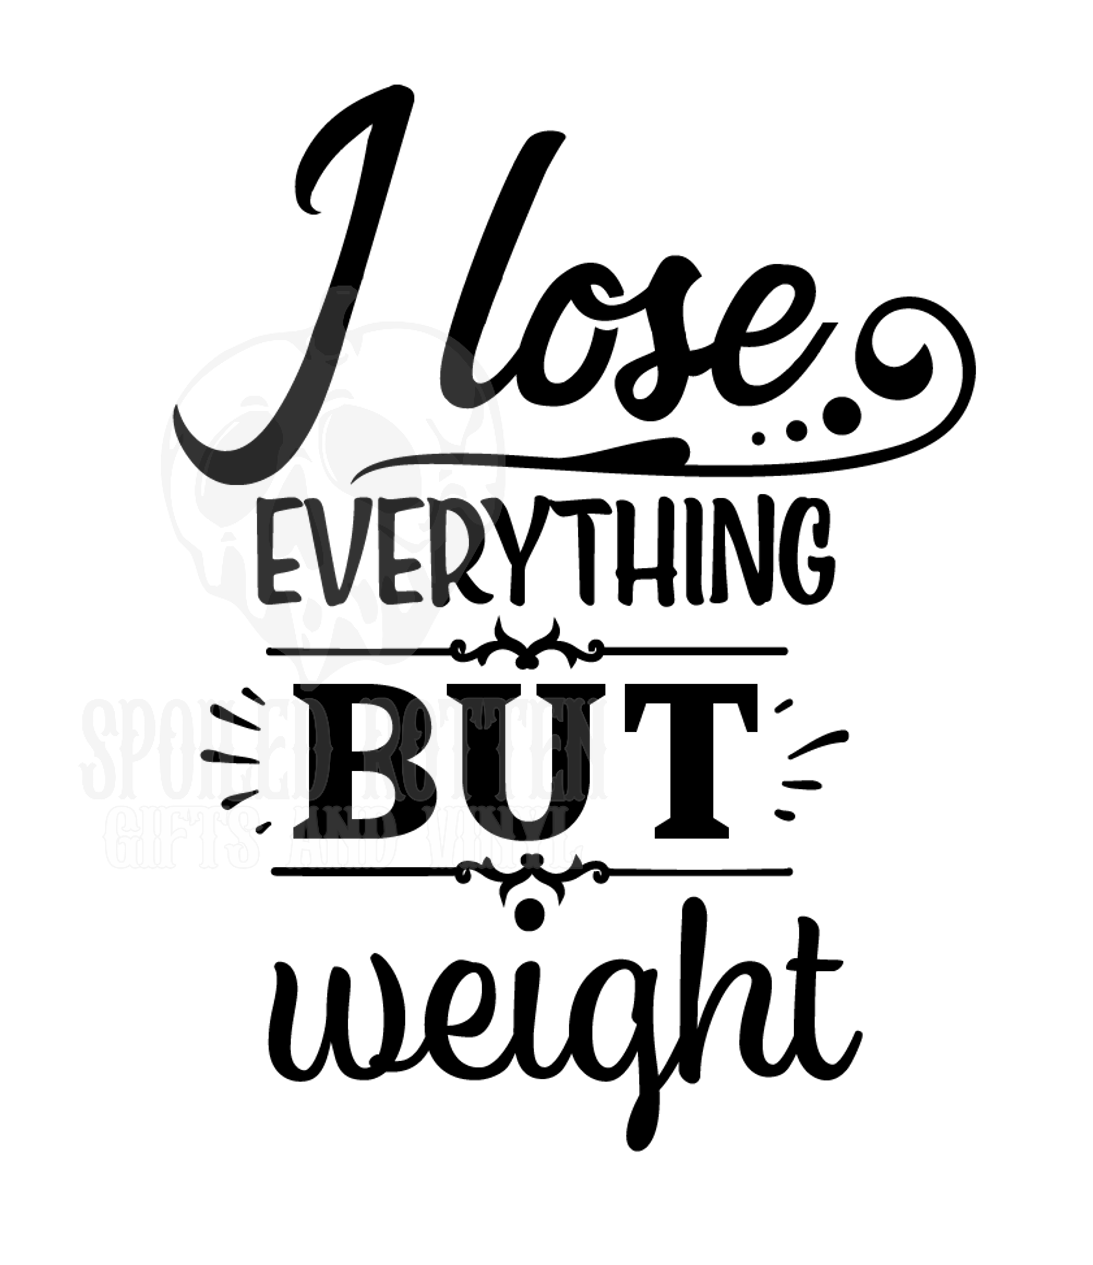 I Lose Everything But Weight vinyl sticker